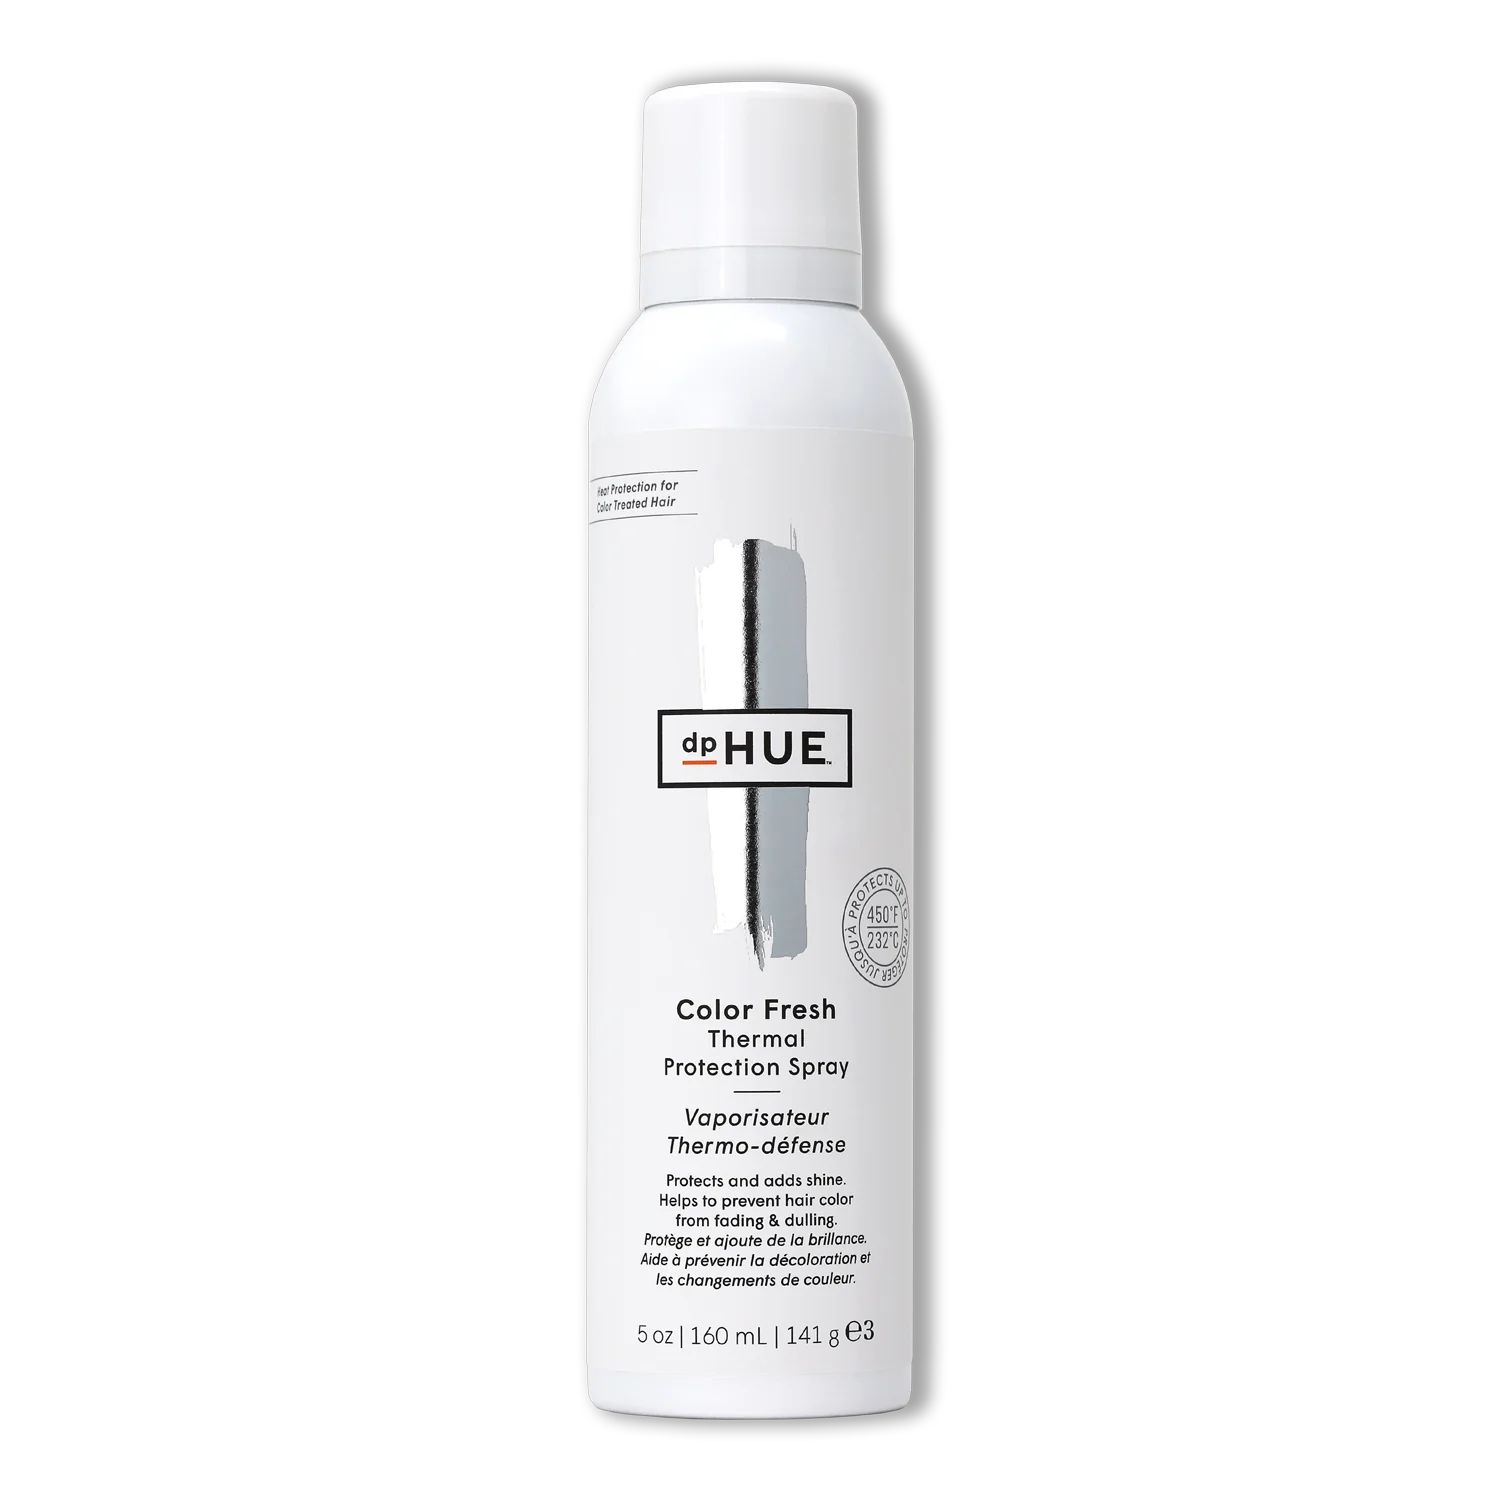 Color Fresh Thermal Protection Spray | dpHUE